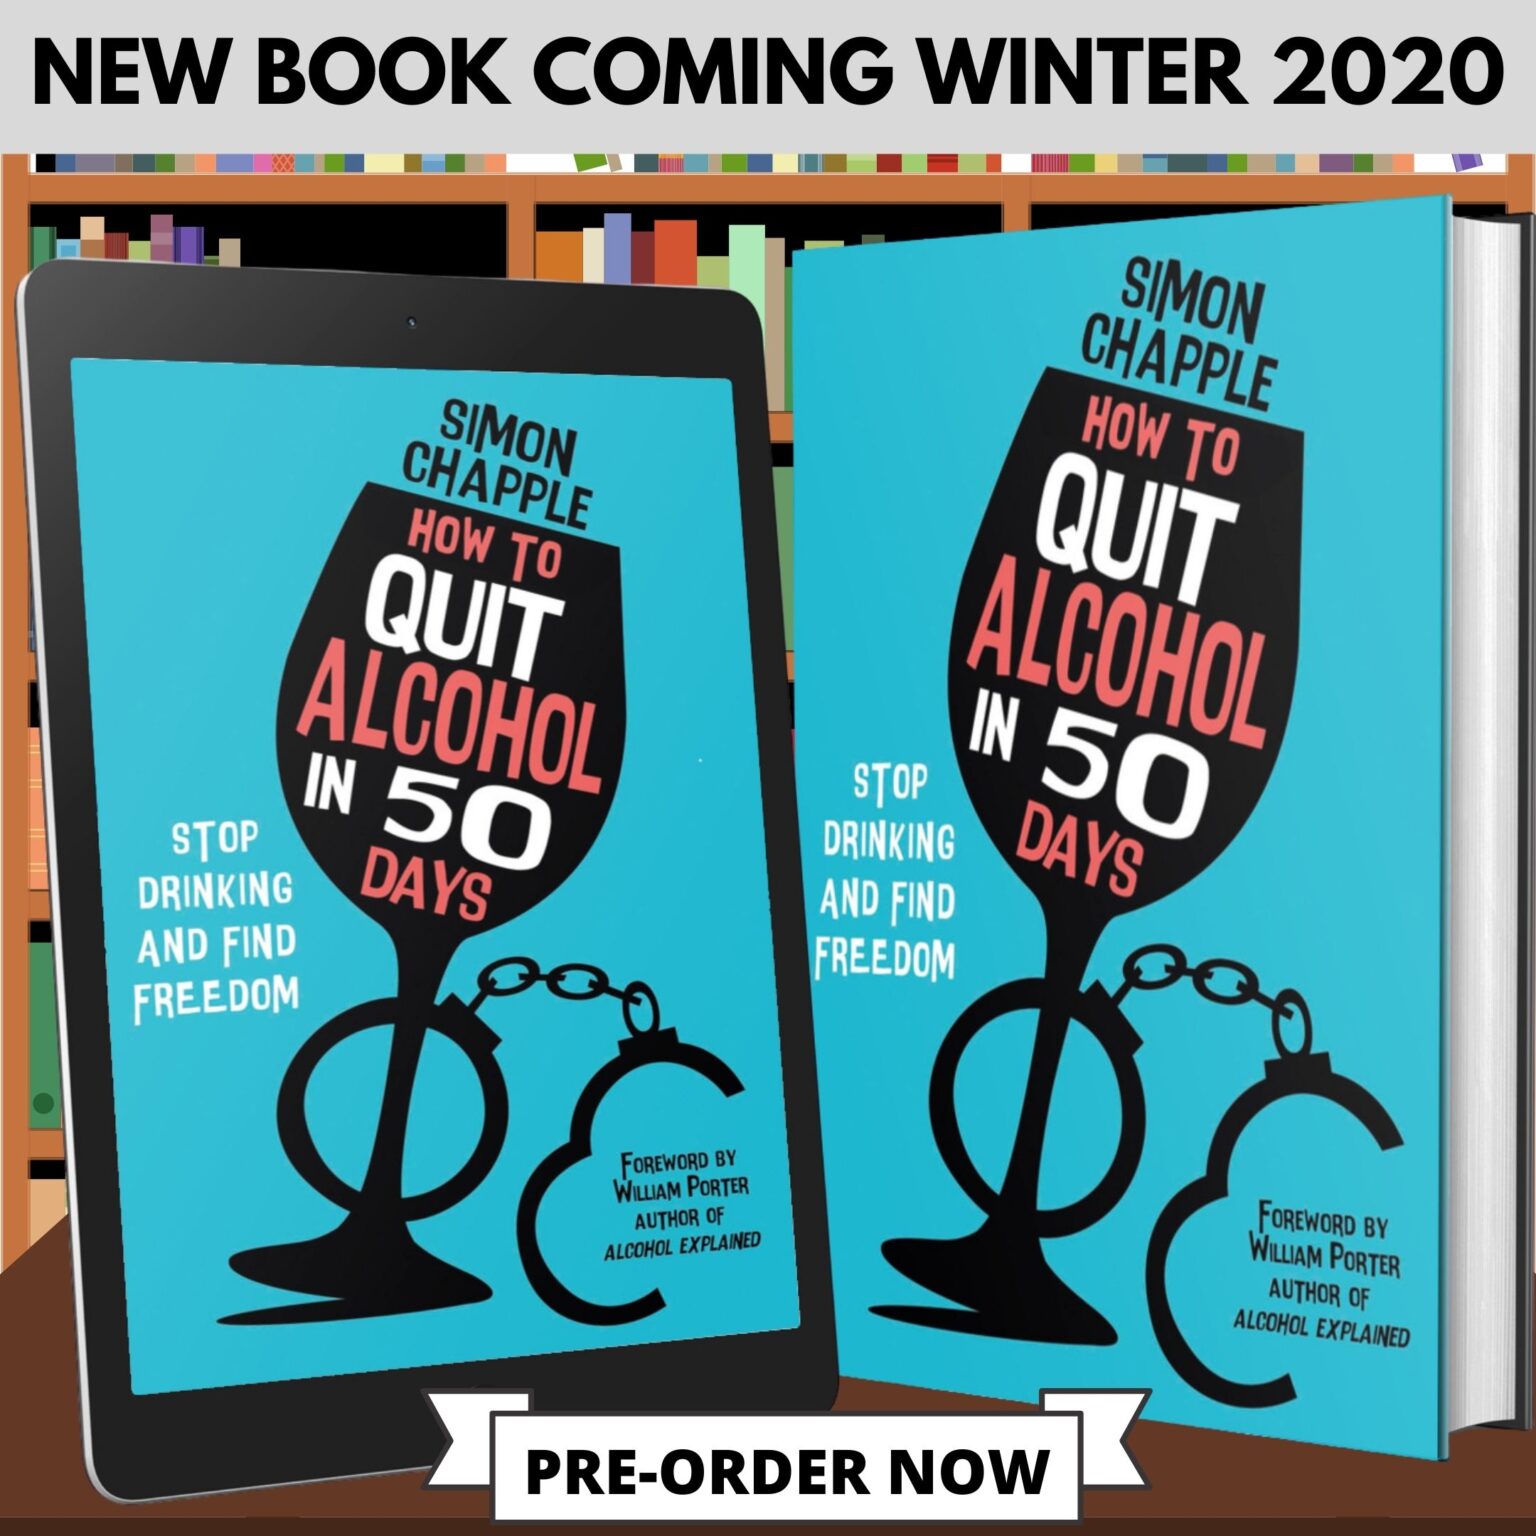 How to quit alcohol in 50 days - stop drinking books by Simon Chapple